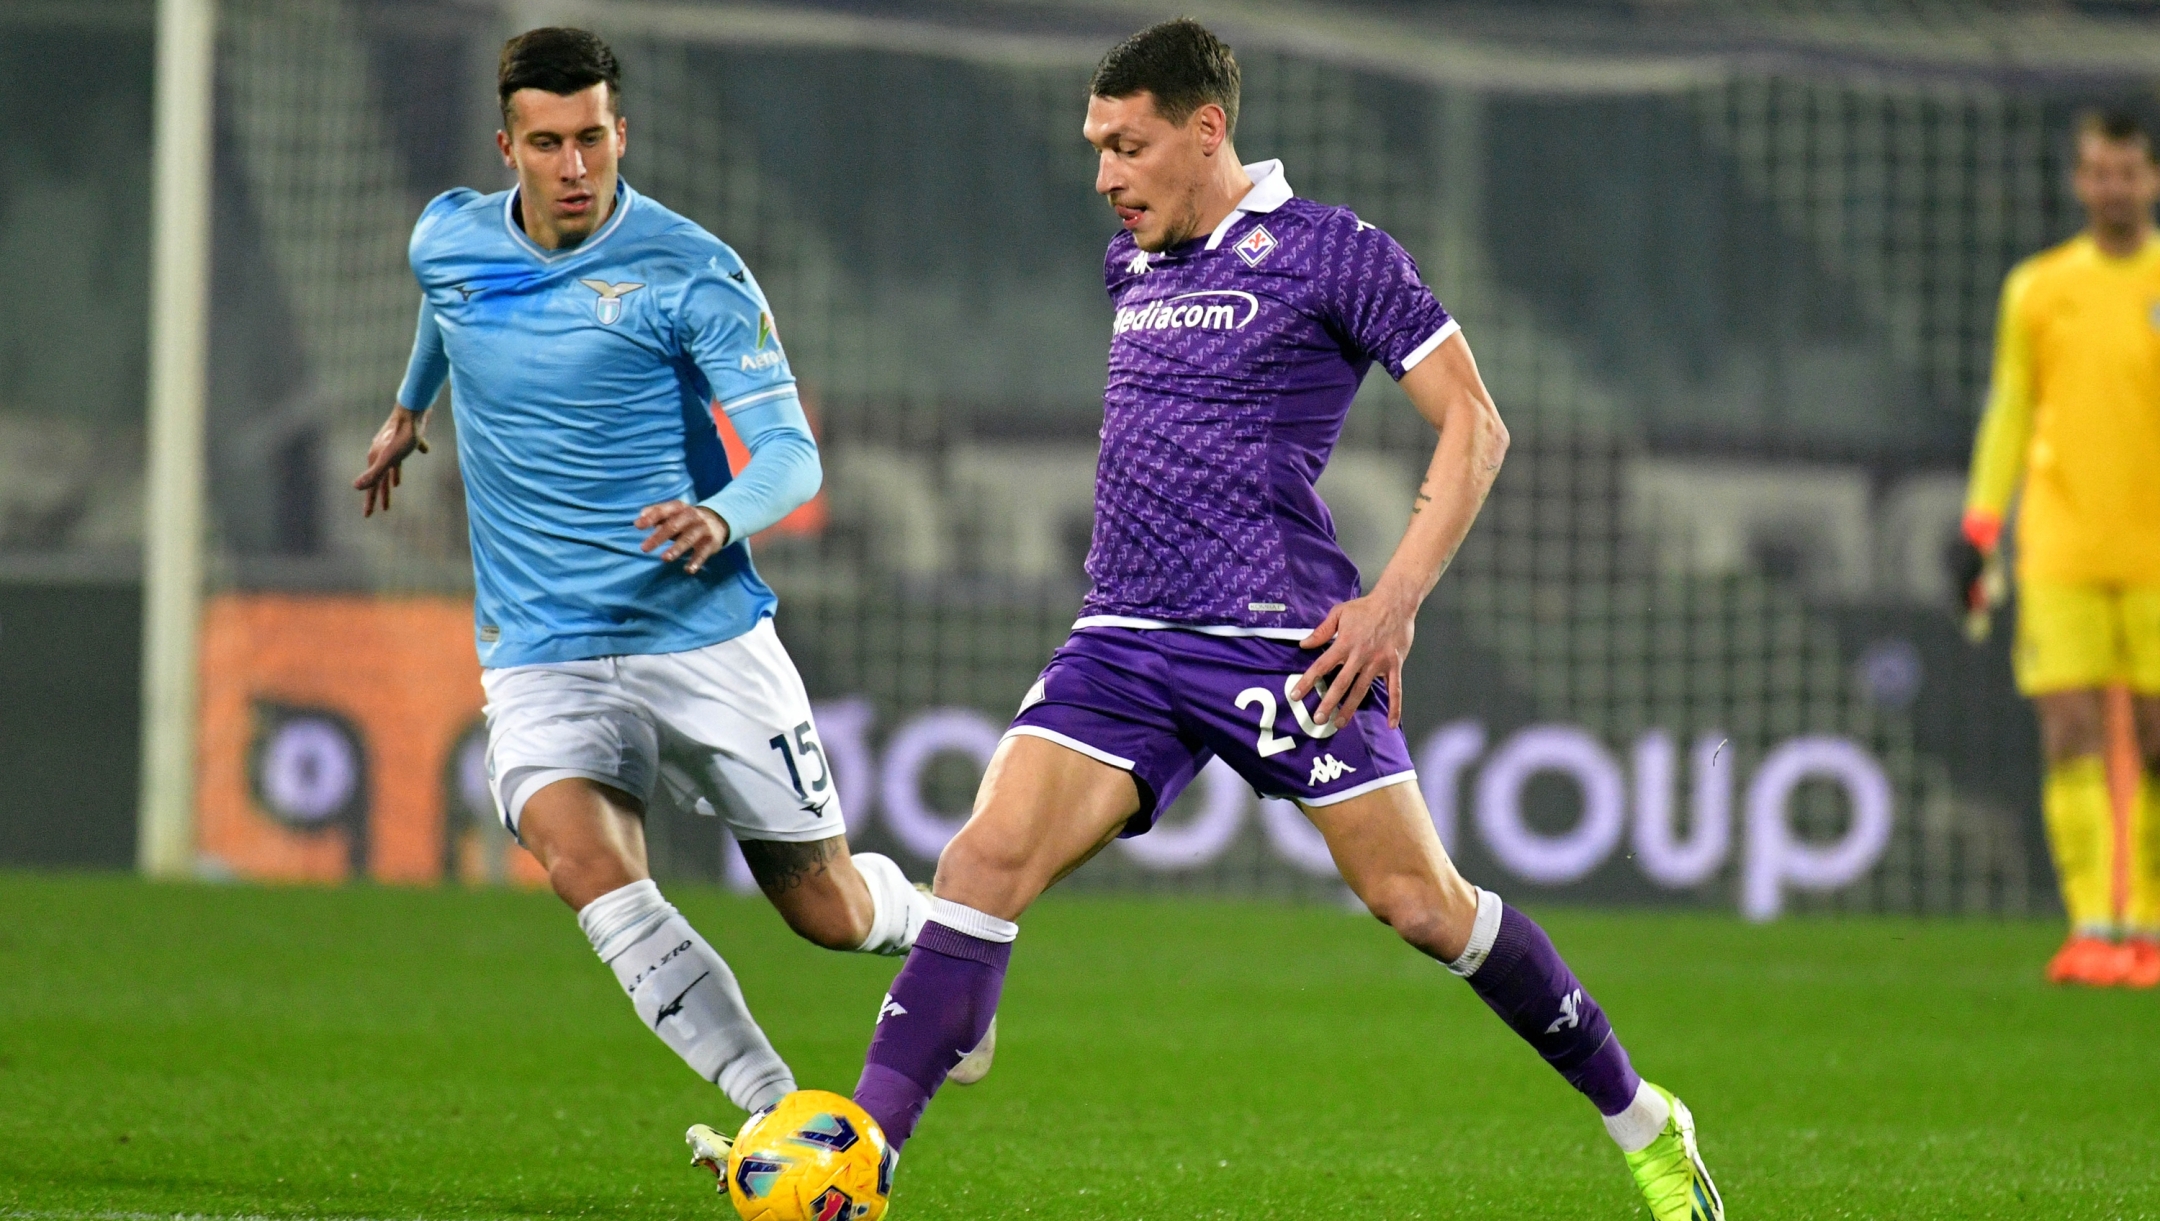 FLORENCE, ITALY - FEBRUARY 26: Nicolò Casale of SS Lazio compete for the ball with Andrea Belotti ACF Fiorentina during the Serie A TIM match between ACF Fiorentina and SS Lazio at Stadio Artemio Franchi on February 26, 2024 in Florence, Italy. (Photo by Marco Rosi - SS Lazio/Getty Images)